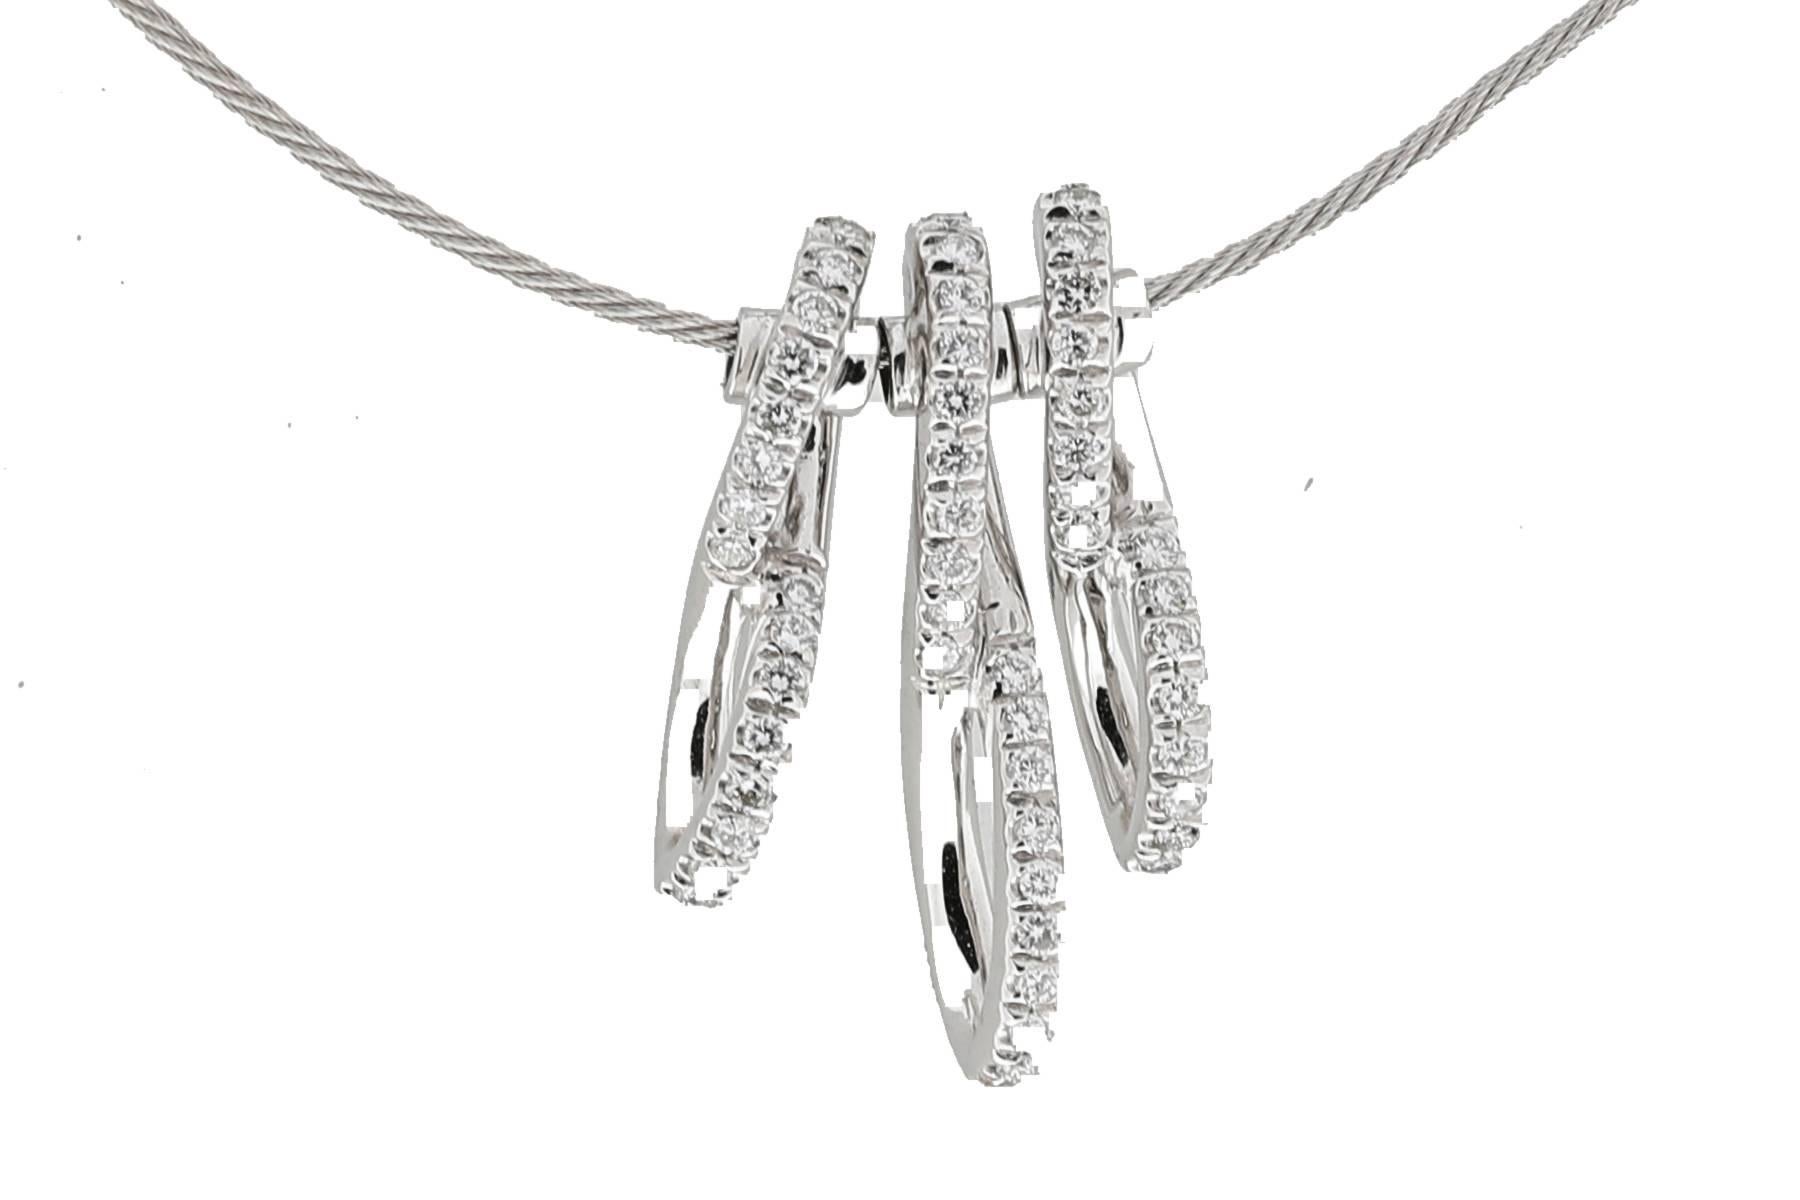 18K cable necklace with 3 figure eight design sliding pendants containing pave set diamonds weighing combined 0.60 carat.